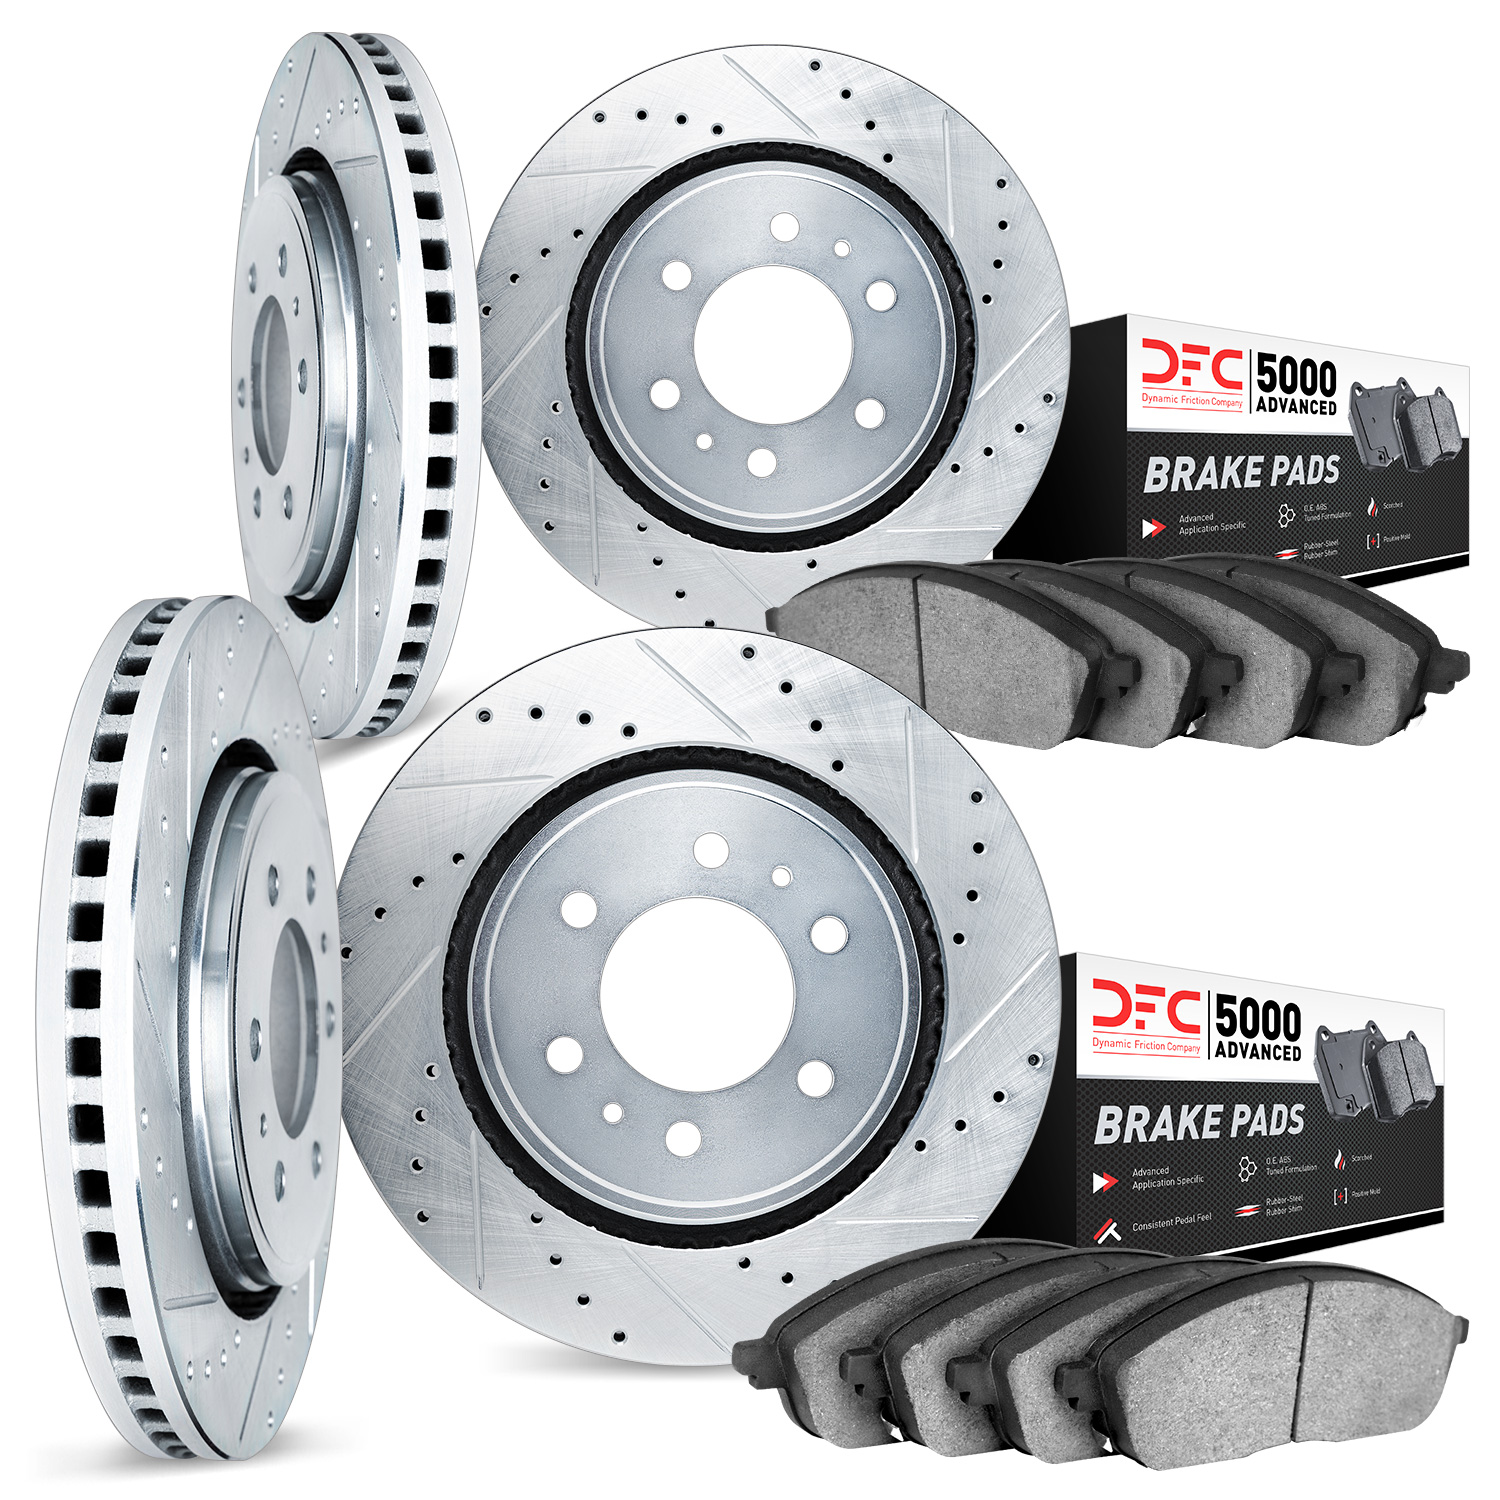 7504-40233 Drilled/Slotted Brake Rotors w/5000 Advanced Brake Pads Kit [Silver], 2007-2018 Multiple Makes/Models, Position: Fron